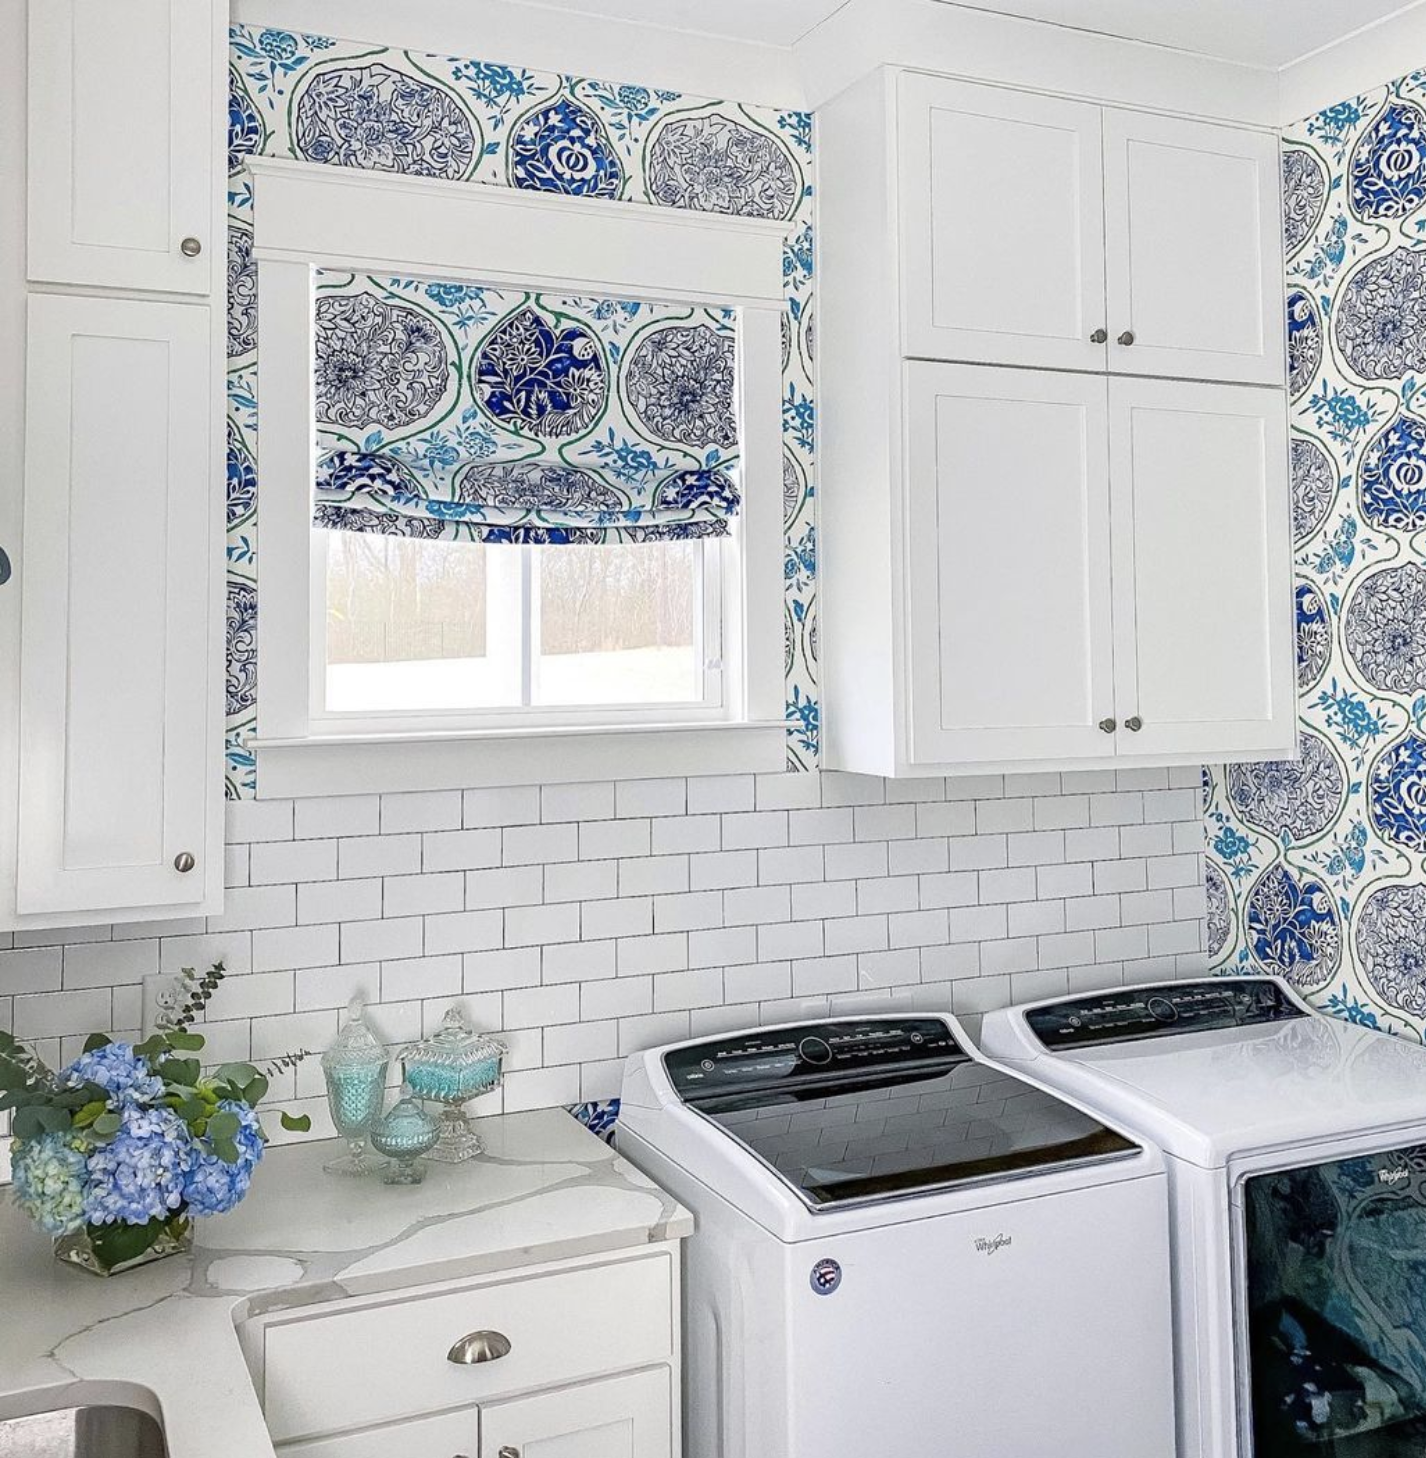 Beautiful blue and white laundry room with subway tile kellyelko.com